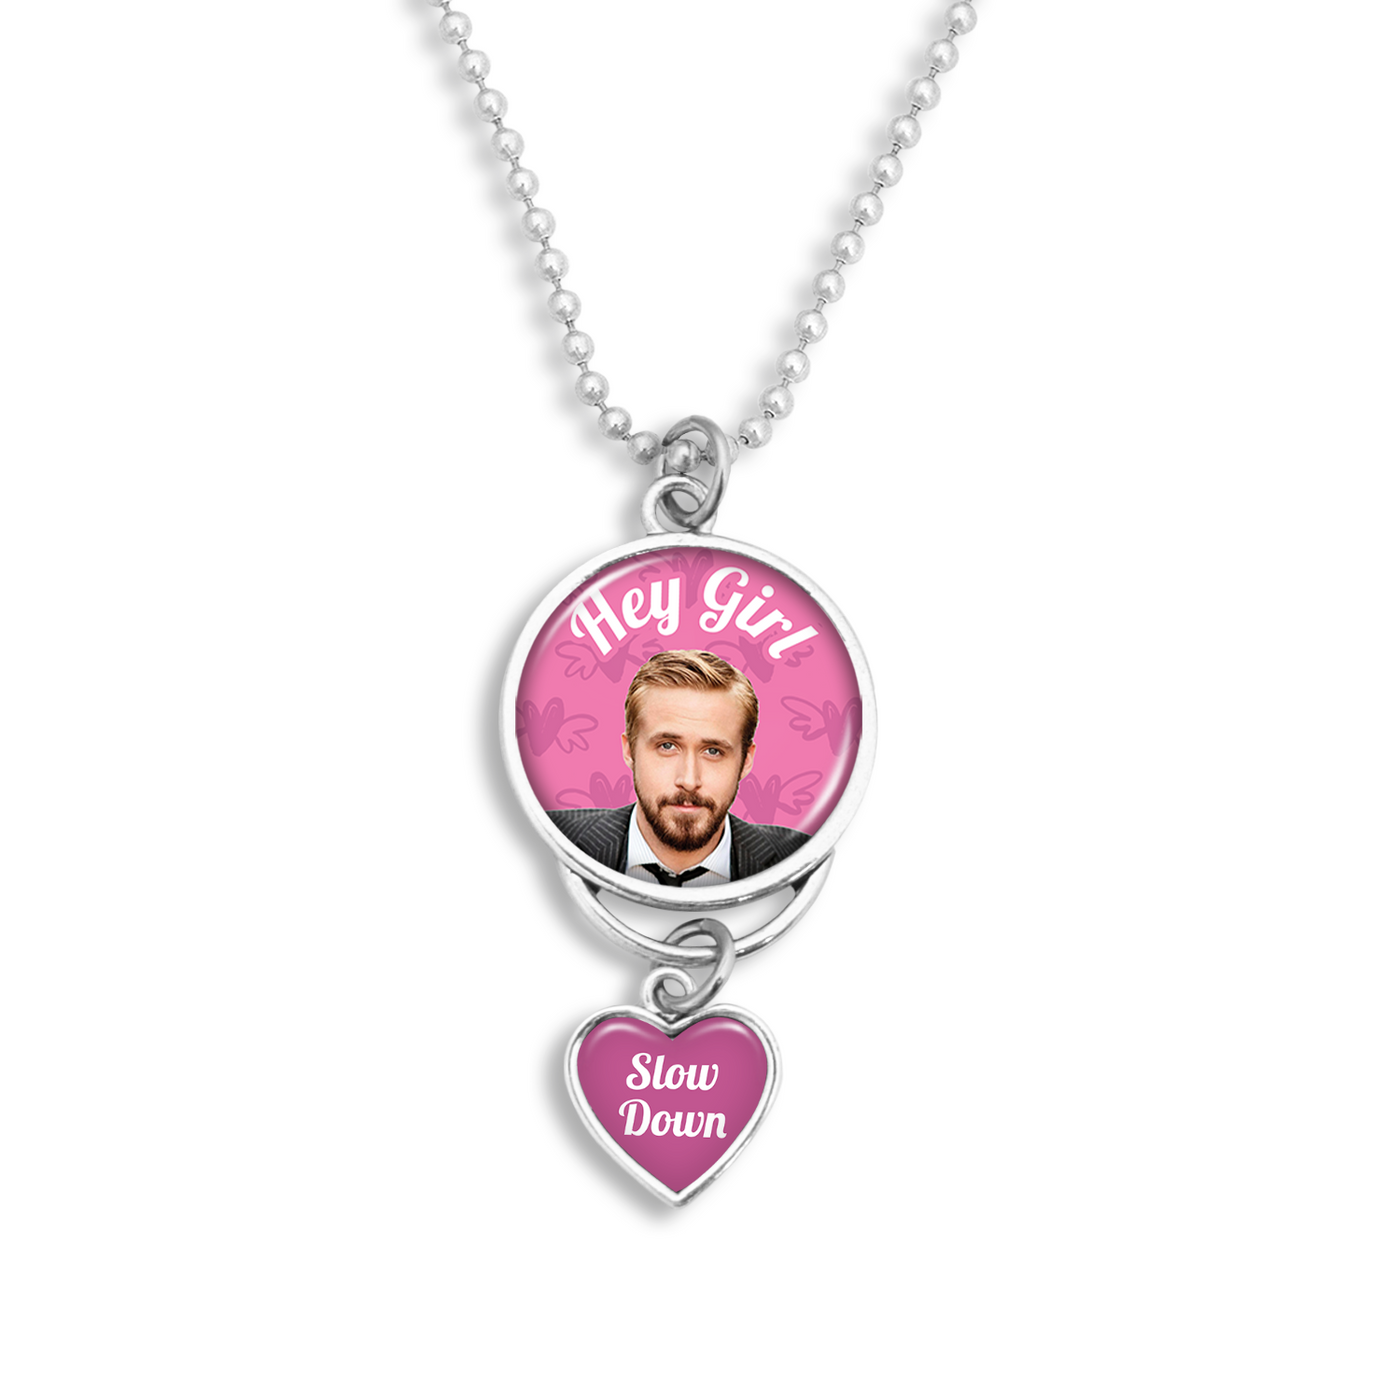 Hey Girl, Slow Down Rearview Mirror Charm